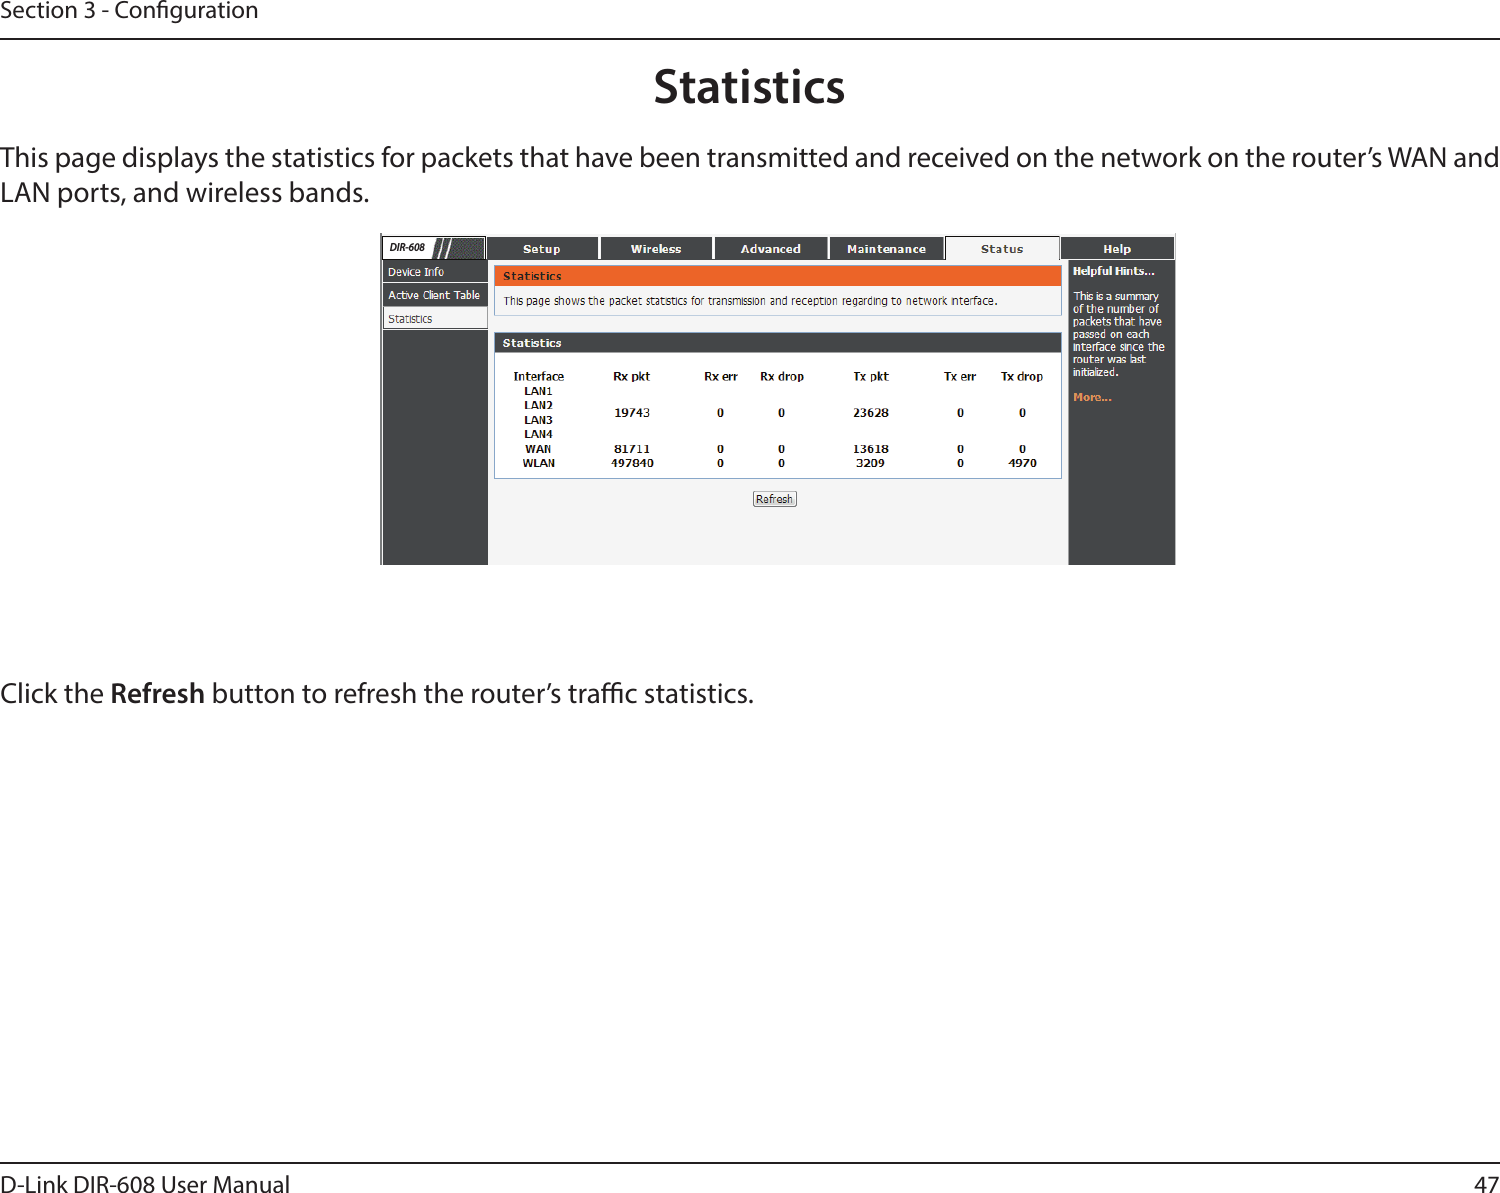 47D-Link DIR-608 User ManualSection 3 - CongurationStatisticsThis page displays the statistics for packets that have been transmitted and received on the network on the router’s WAN and LAN ports, and wireless bands. Click the Refresh button to refresh the router’s trac statistics.DIR-608